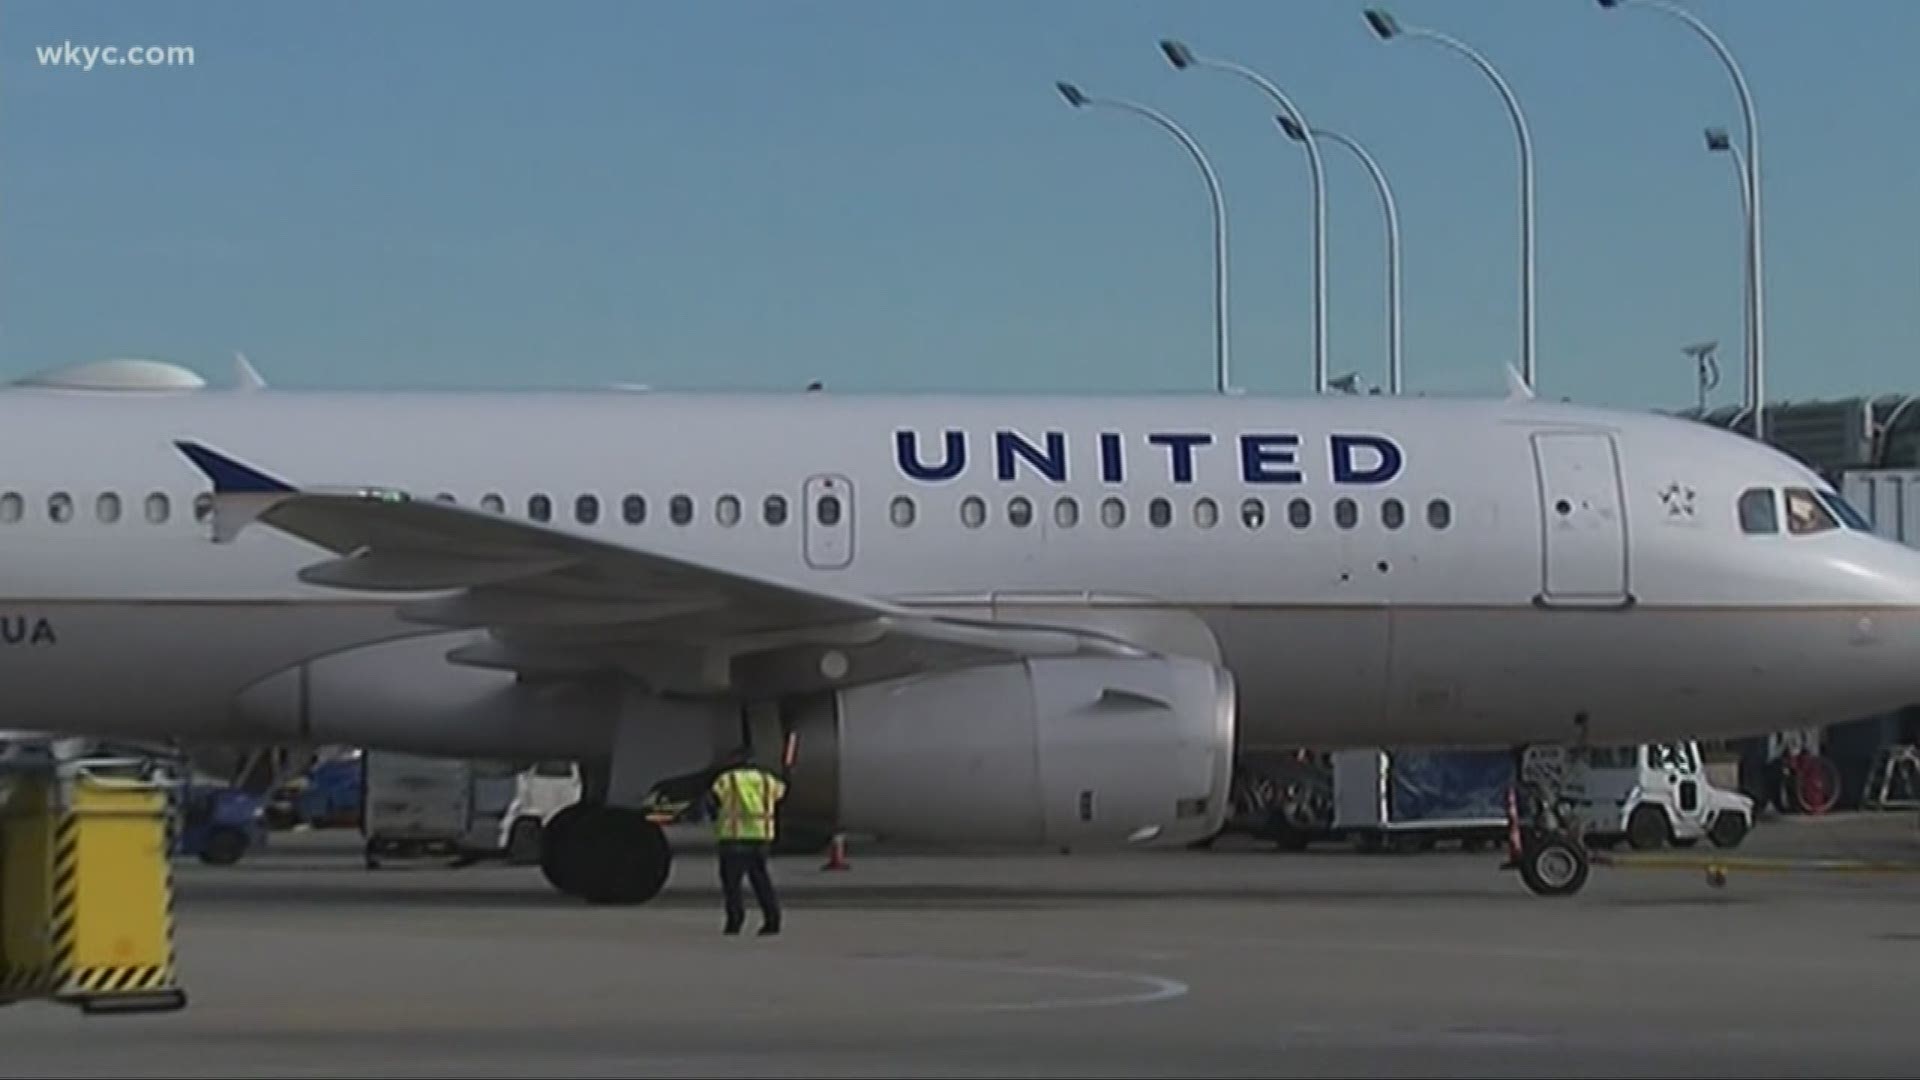 United is discontinuing direct flights from CLE to LaGuardia and Reagan National. However, they are beefing up flights to Newark and Washington Dulles.